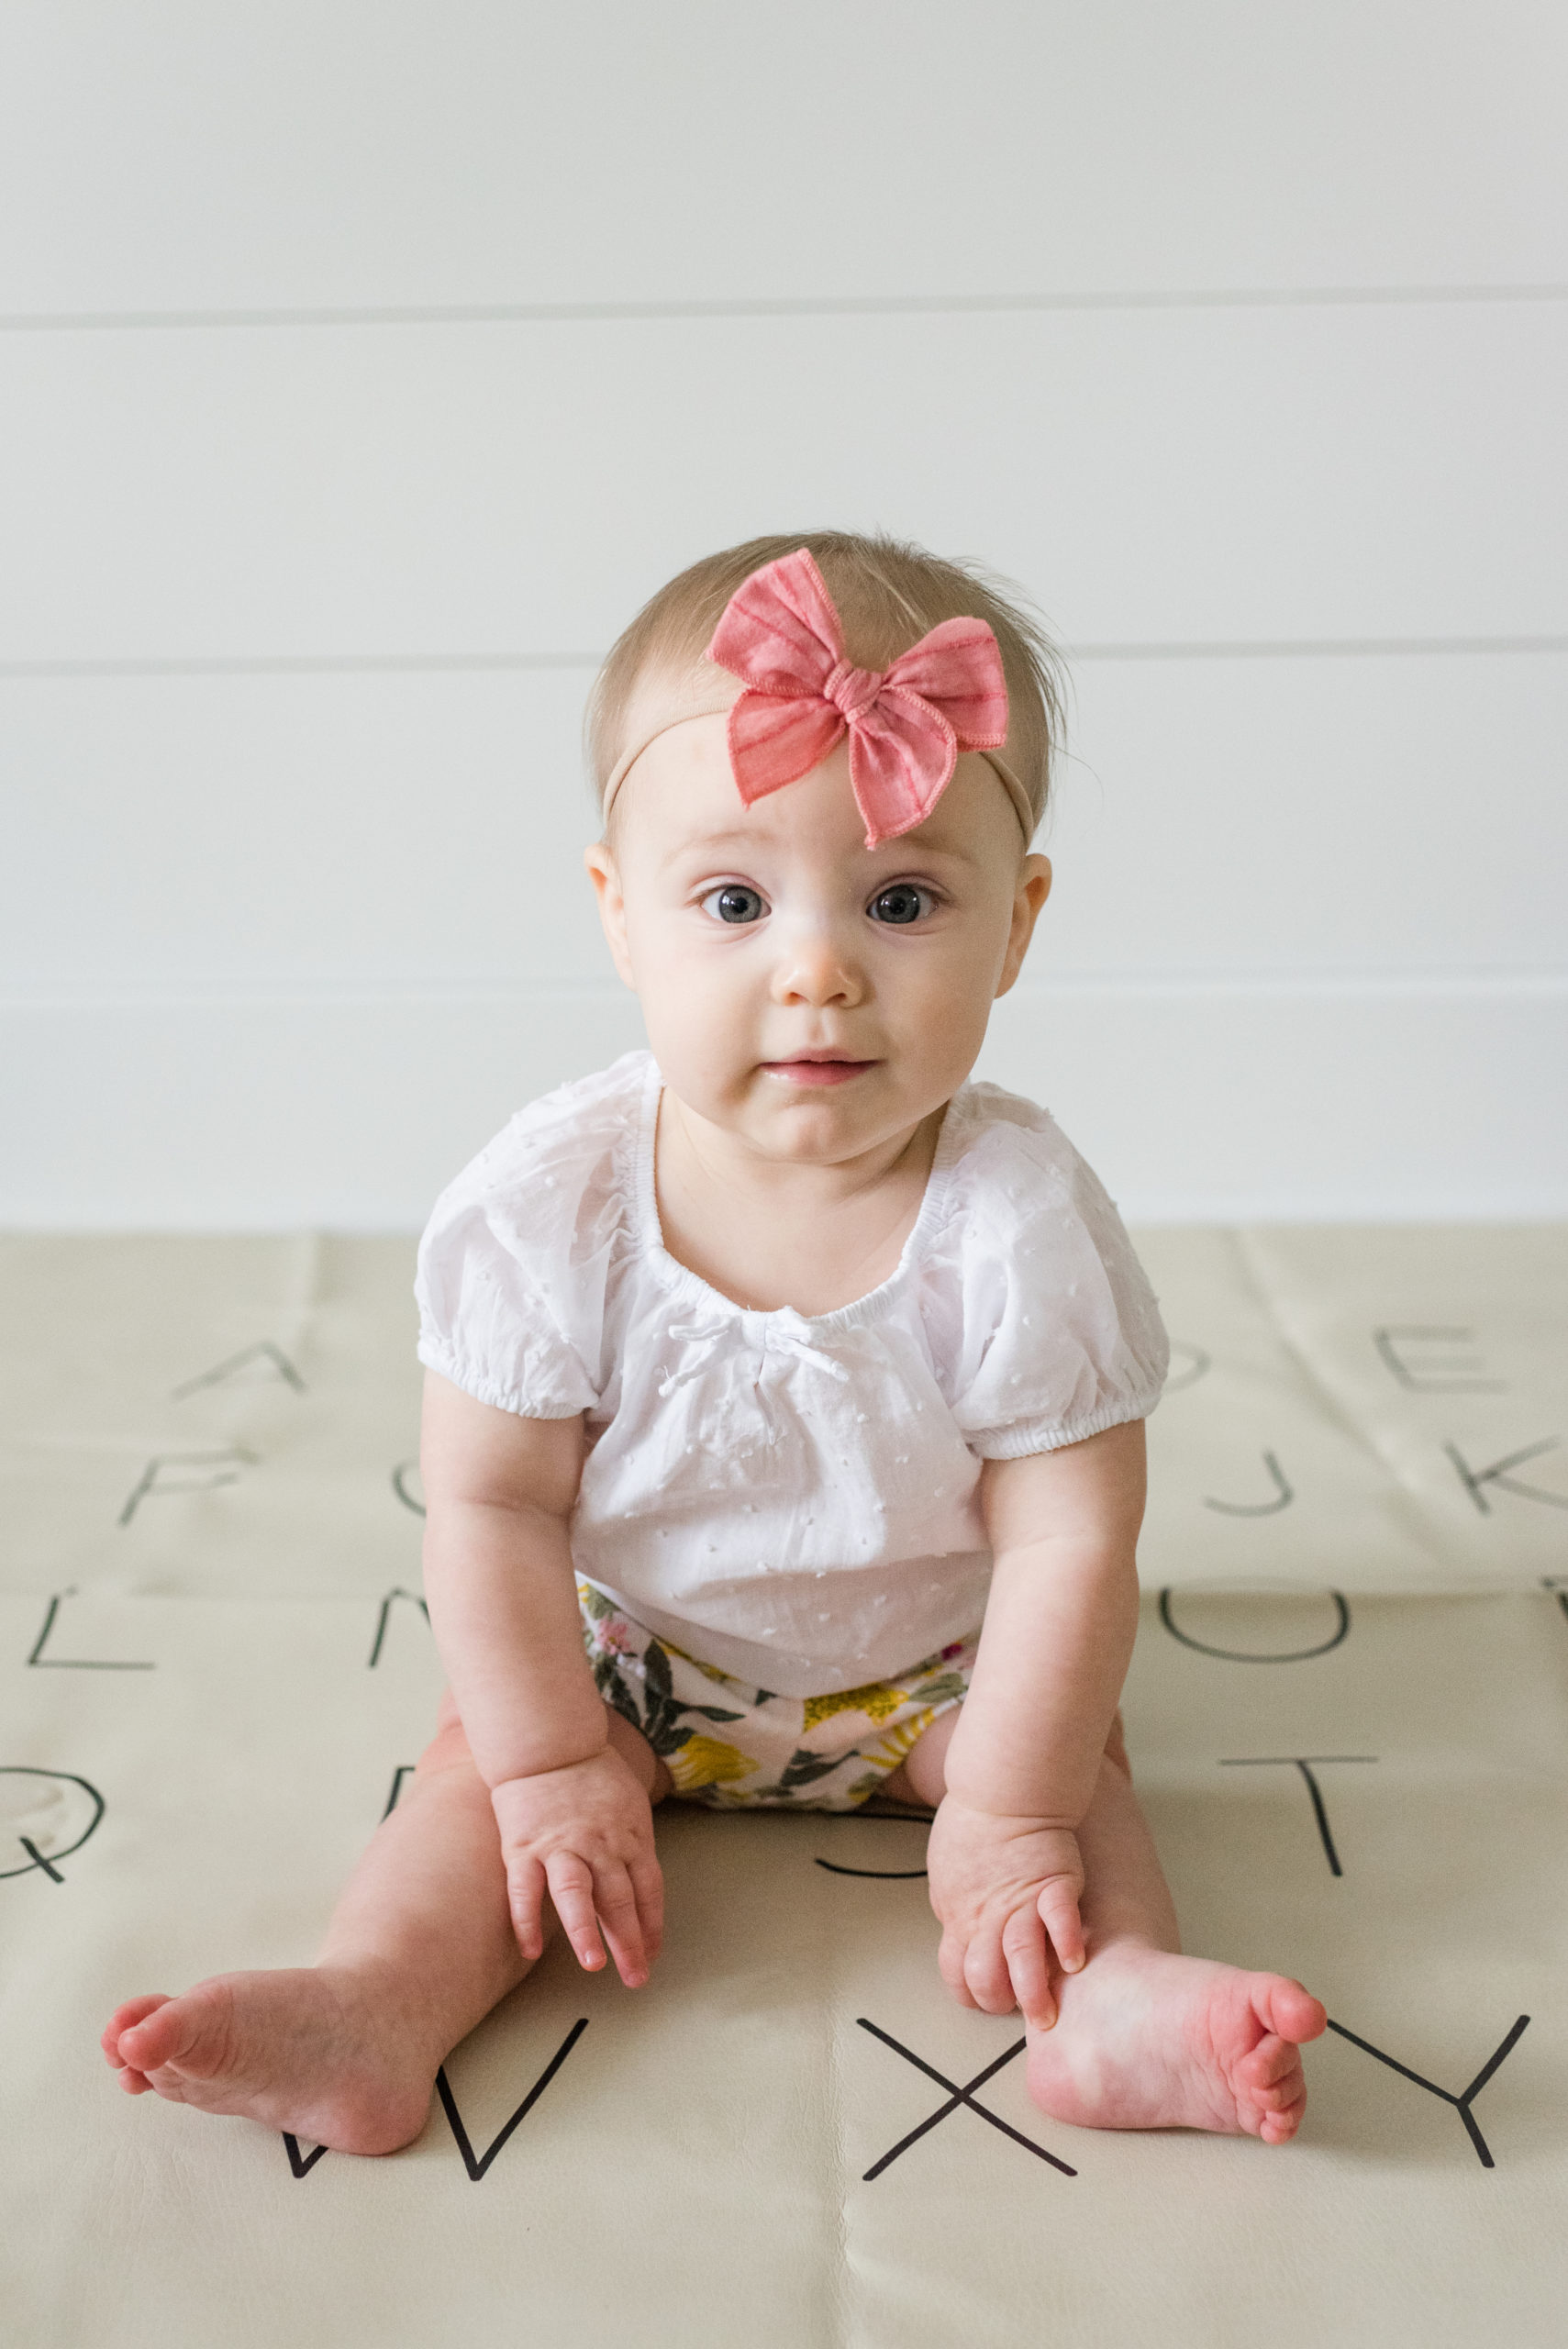 Olivia 8 Months Old - Sweet Williams Photography is a lifestyle, engagement, and wedding photographer serving the Nashville, Tennessee area, and destination locations.